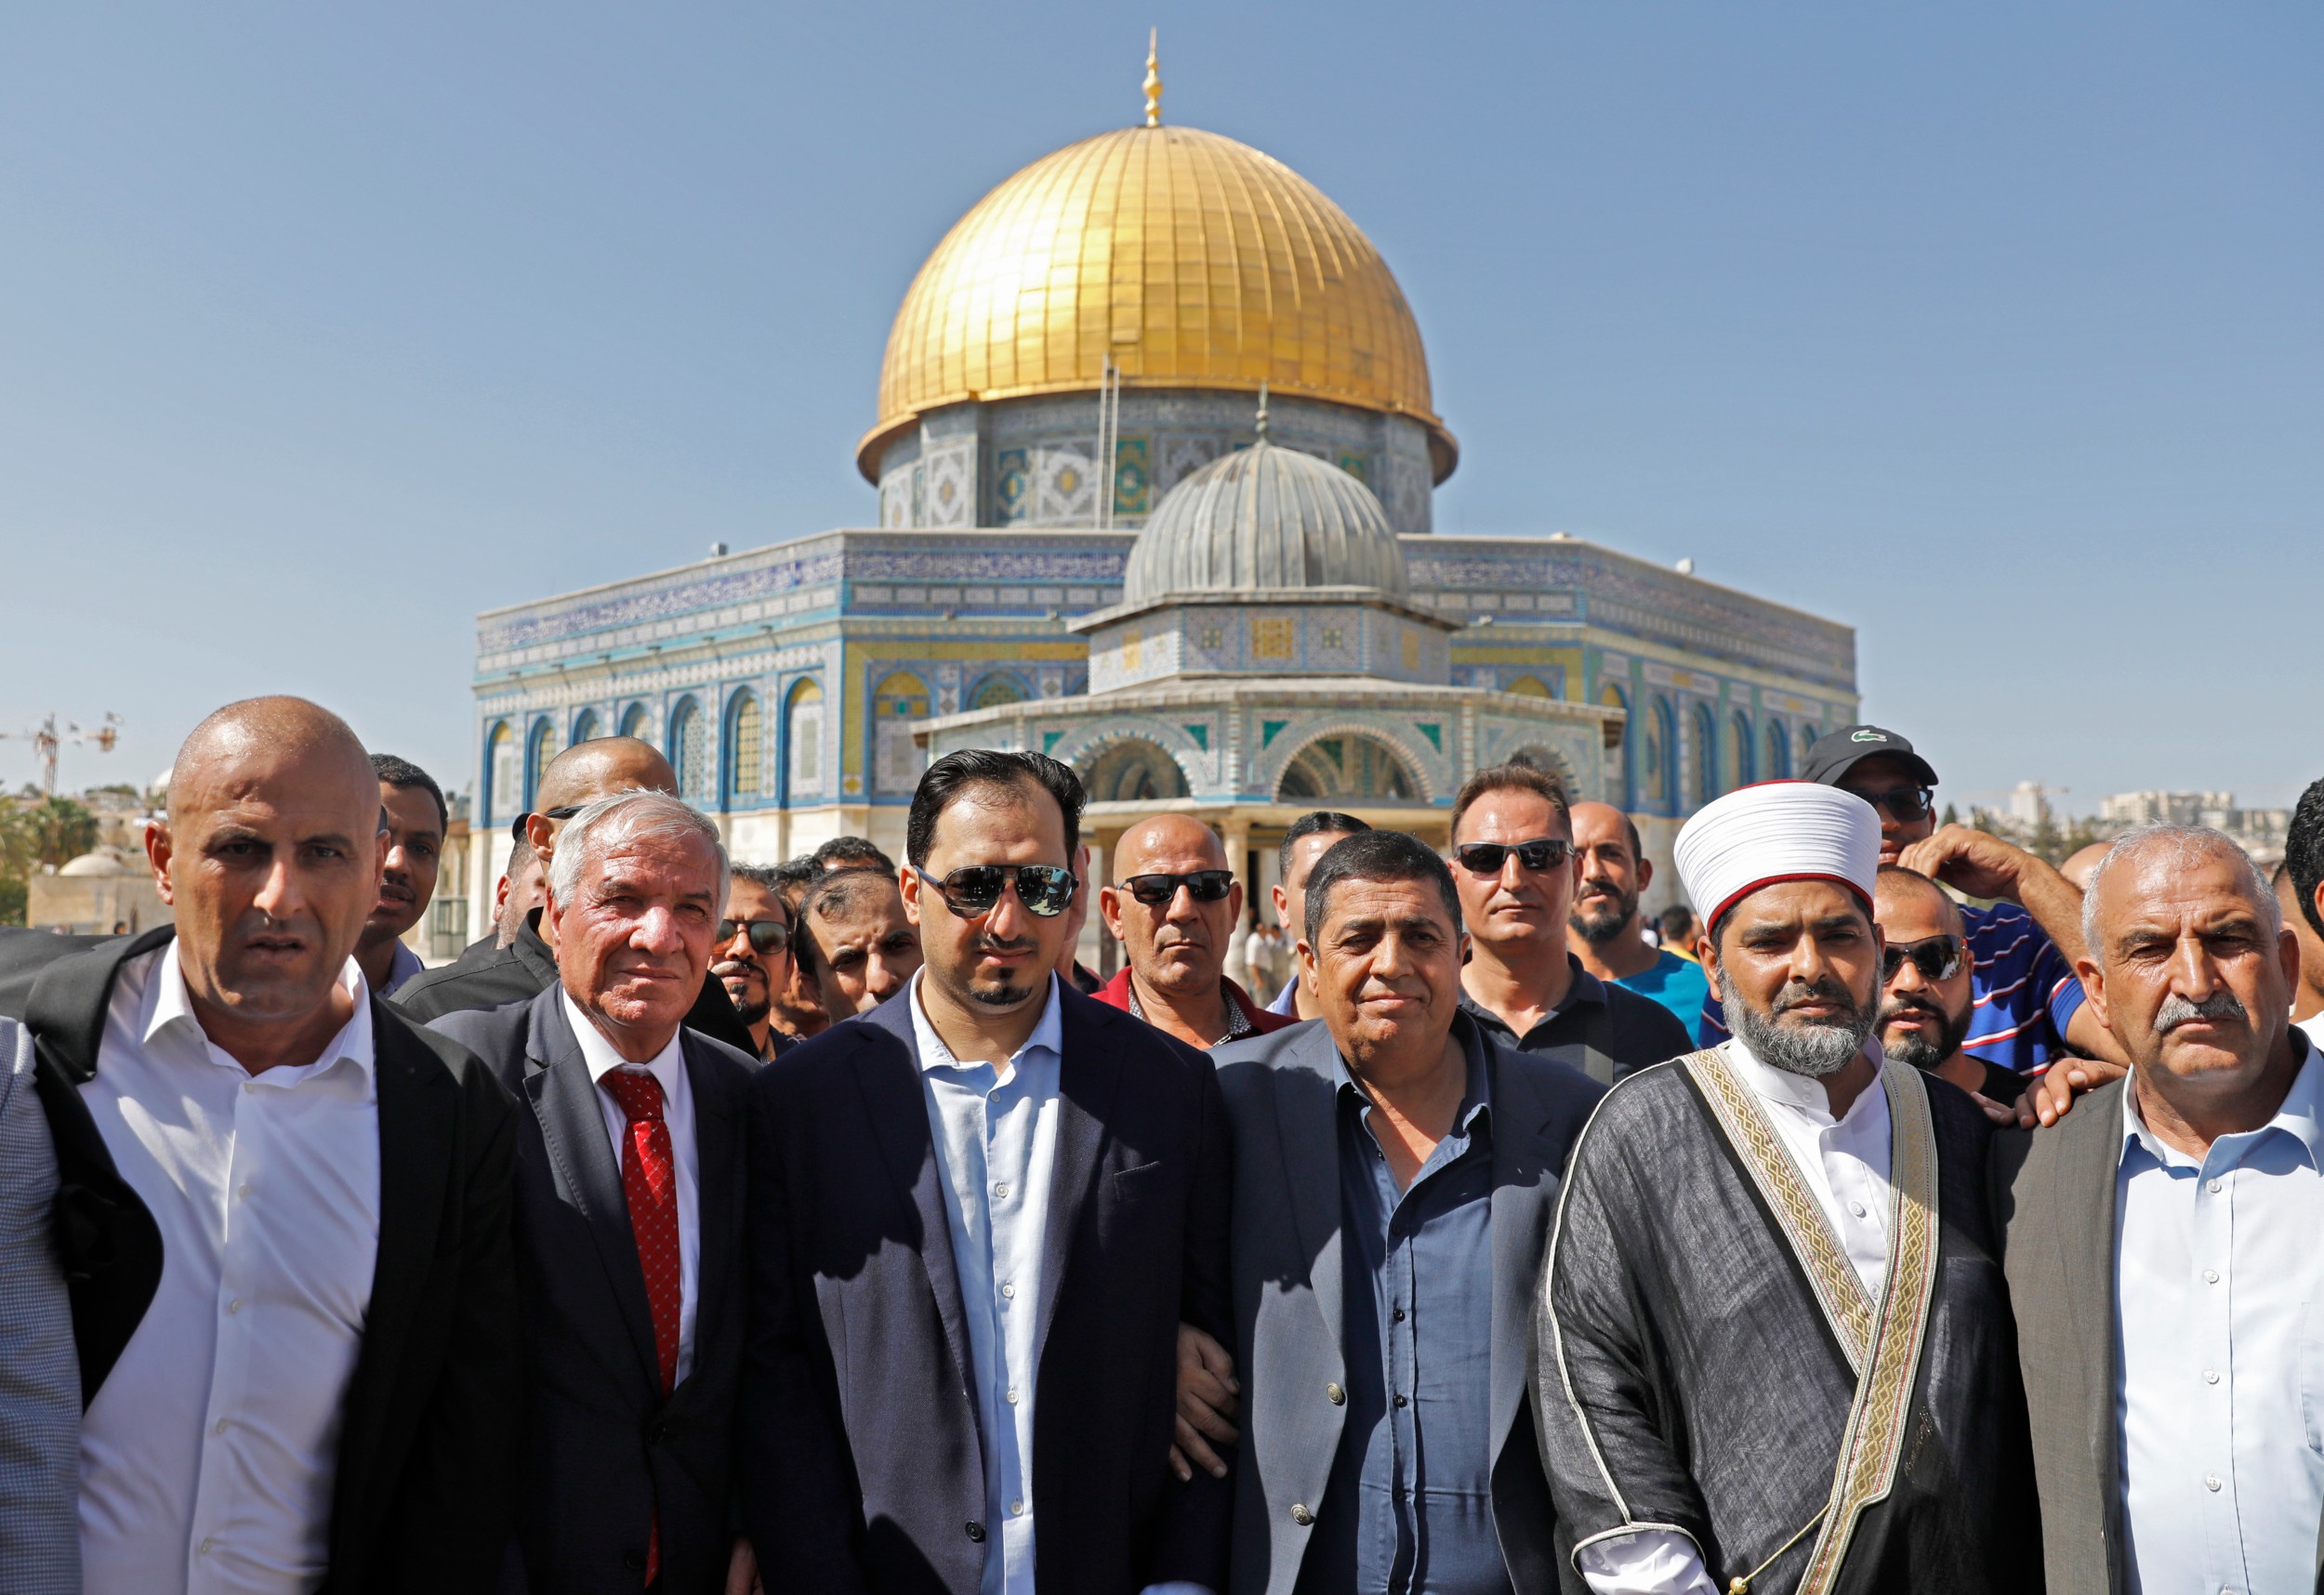 Saudi Football Federation chief Yasser Almisehal, centre, and members of the Saudi football delegation visit the Al-Aqsa Mosque compound in the Old City of Jerusalem on 14 October 2019 (AFP)